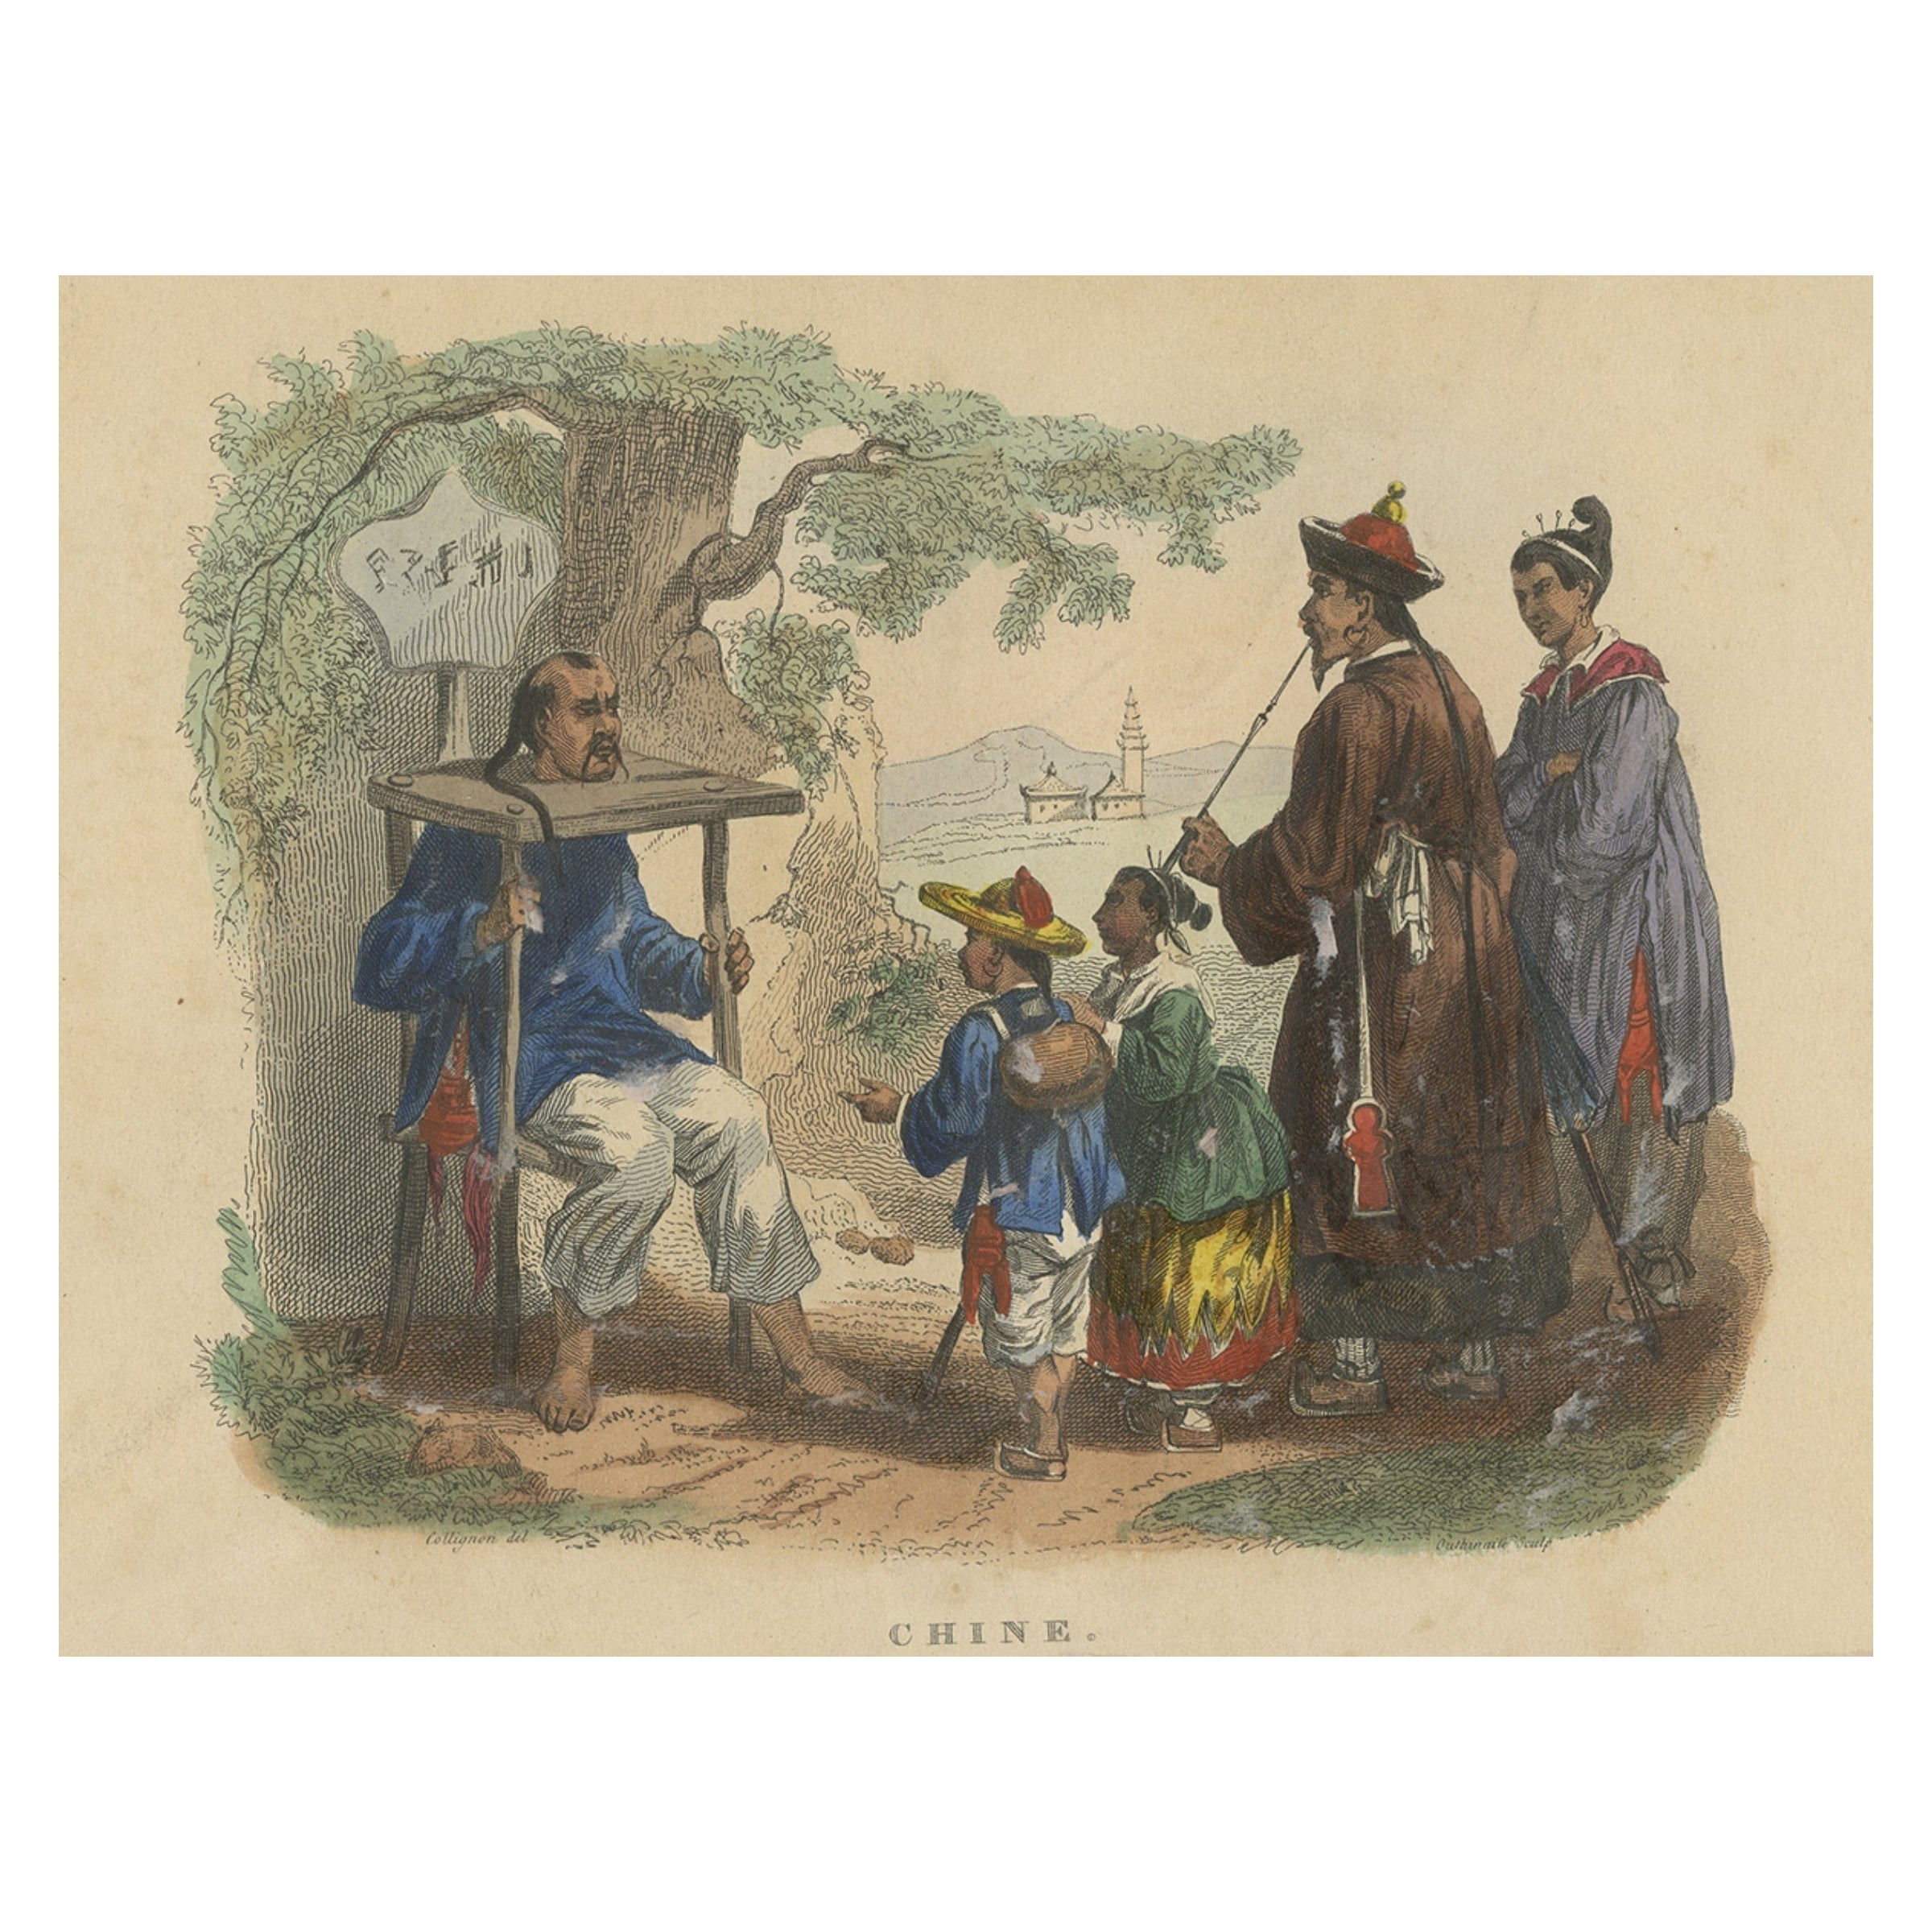 Antique Handcolored Print of Punishment with a Cangue in China, 1844